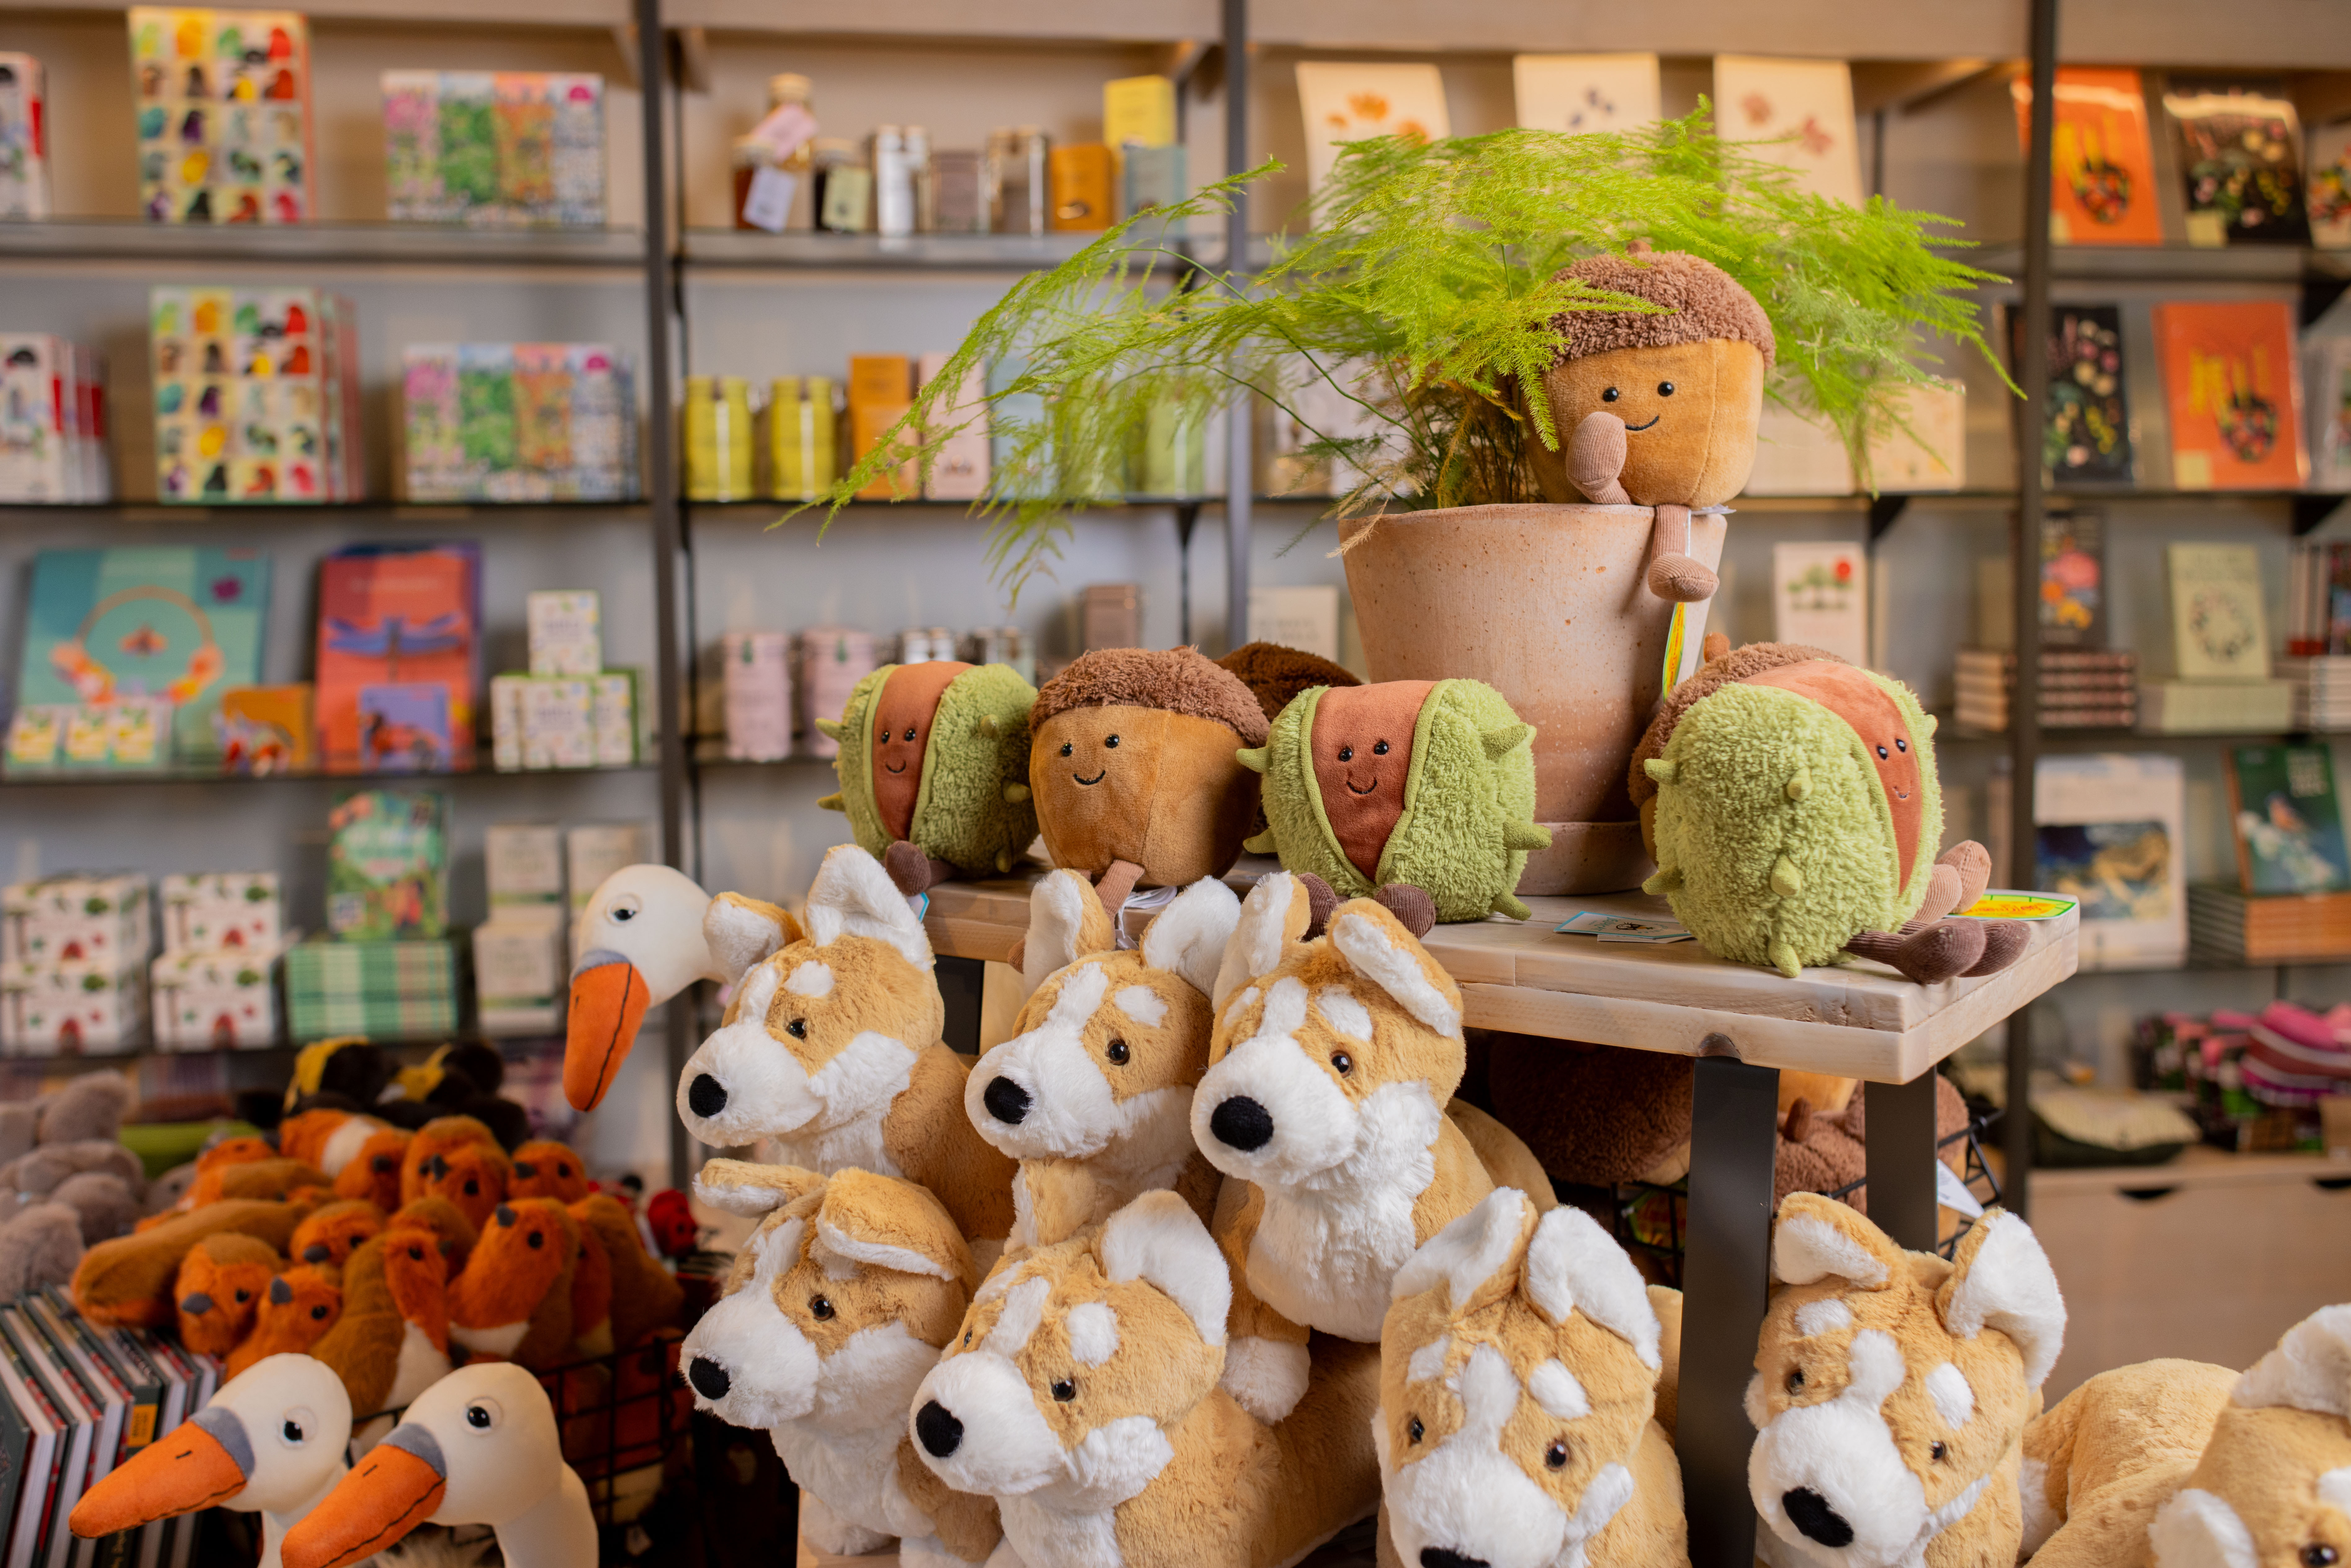 A shop display with piles of soft toy acorns, corgis, swans and robins